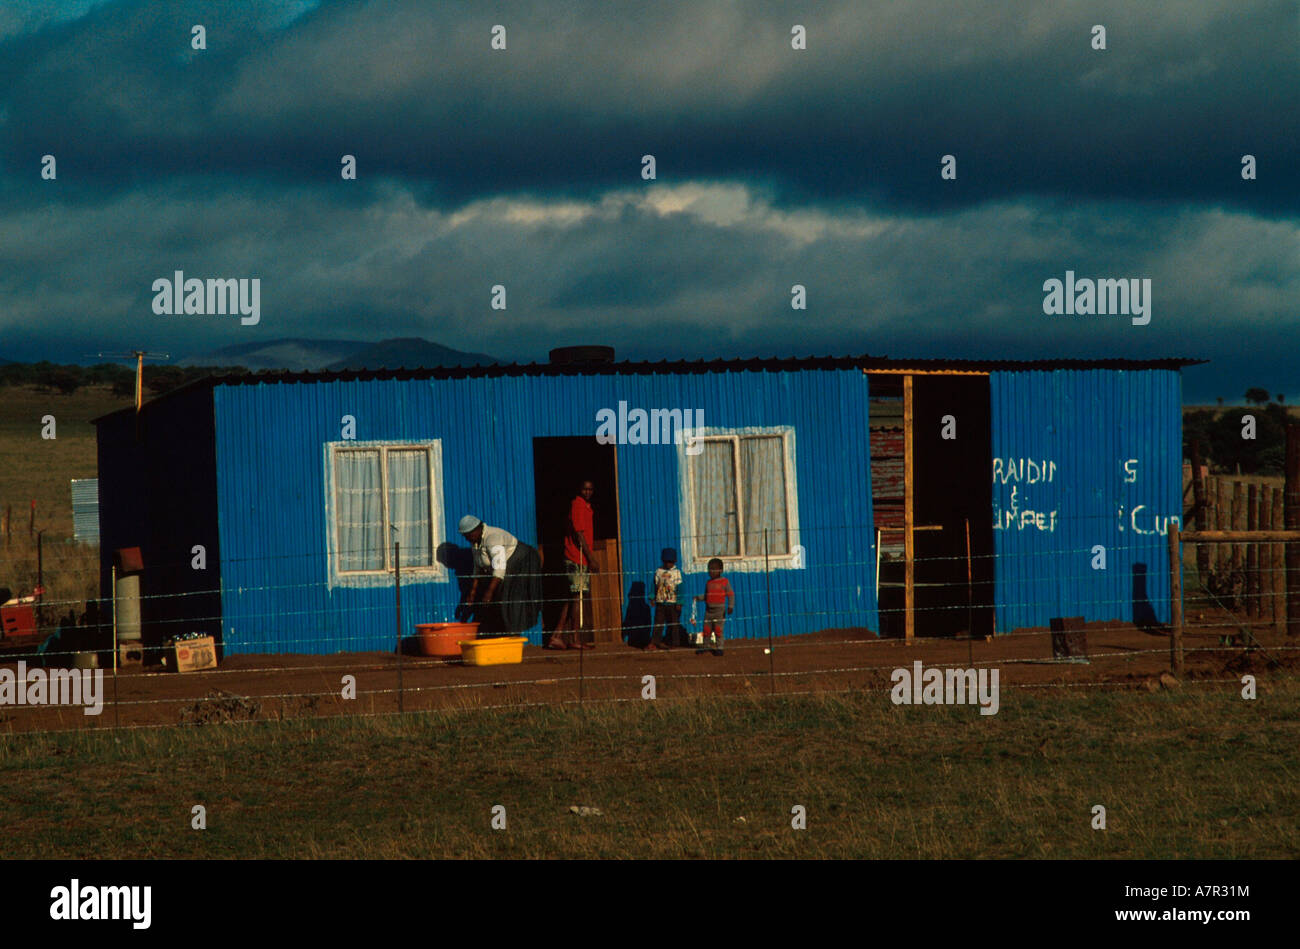 A family works outside a blue corrugated iron shack dwelling against a stormy sky with residents in the doorway Stock Photo